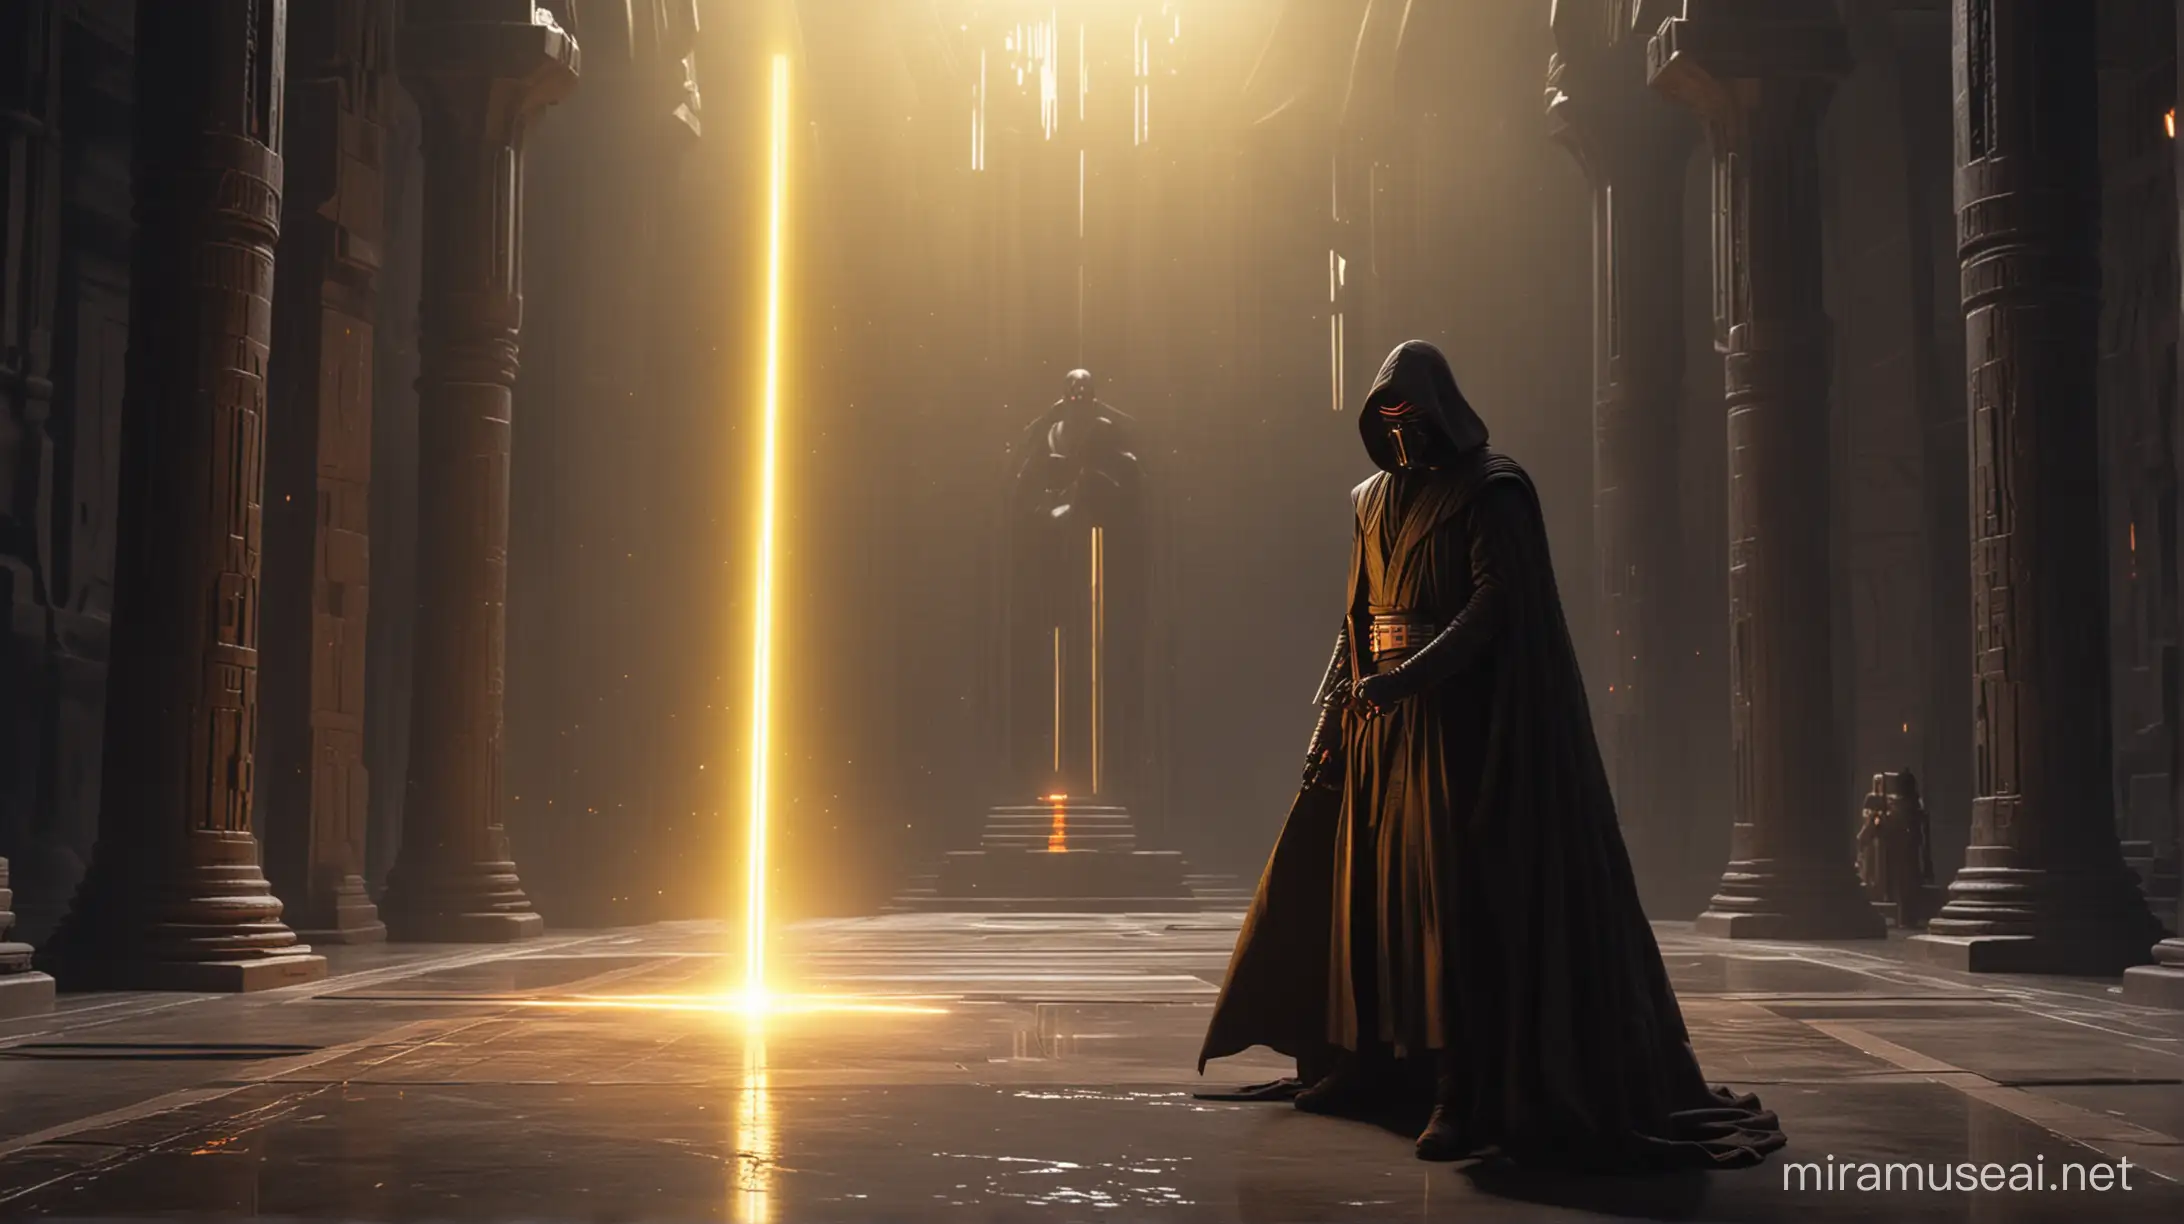 Dark Jedi Seeking Knowledge in Sith Temple with Yellow Lightsaber